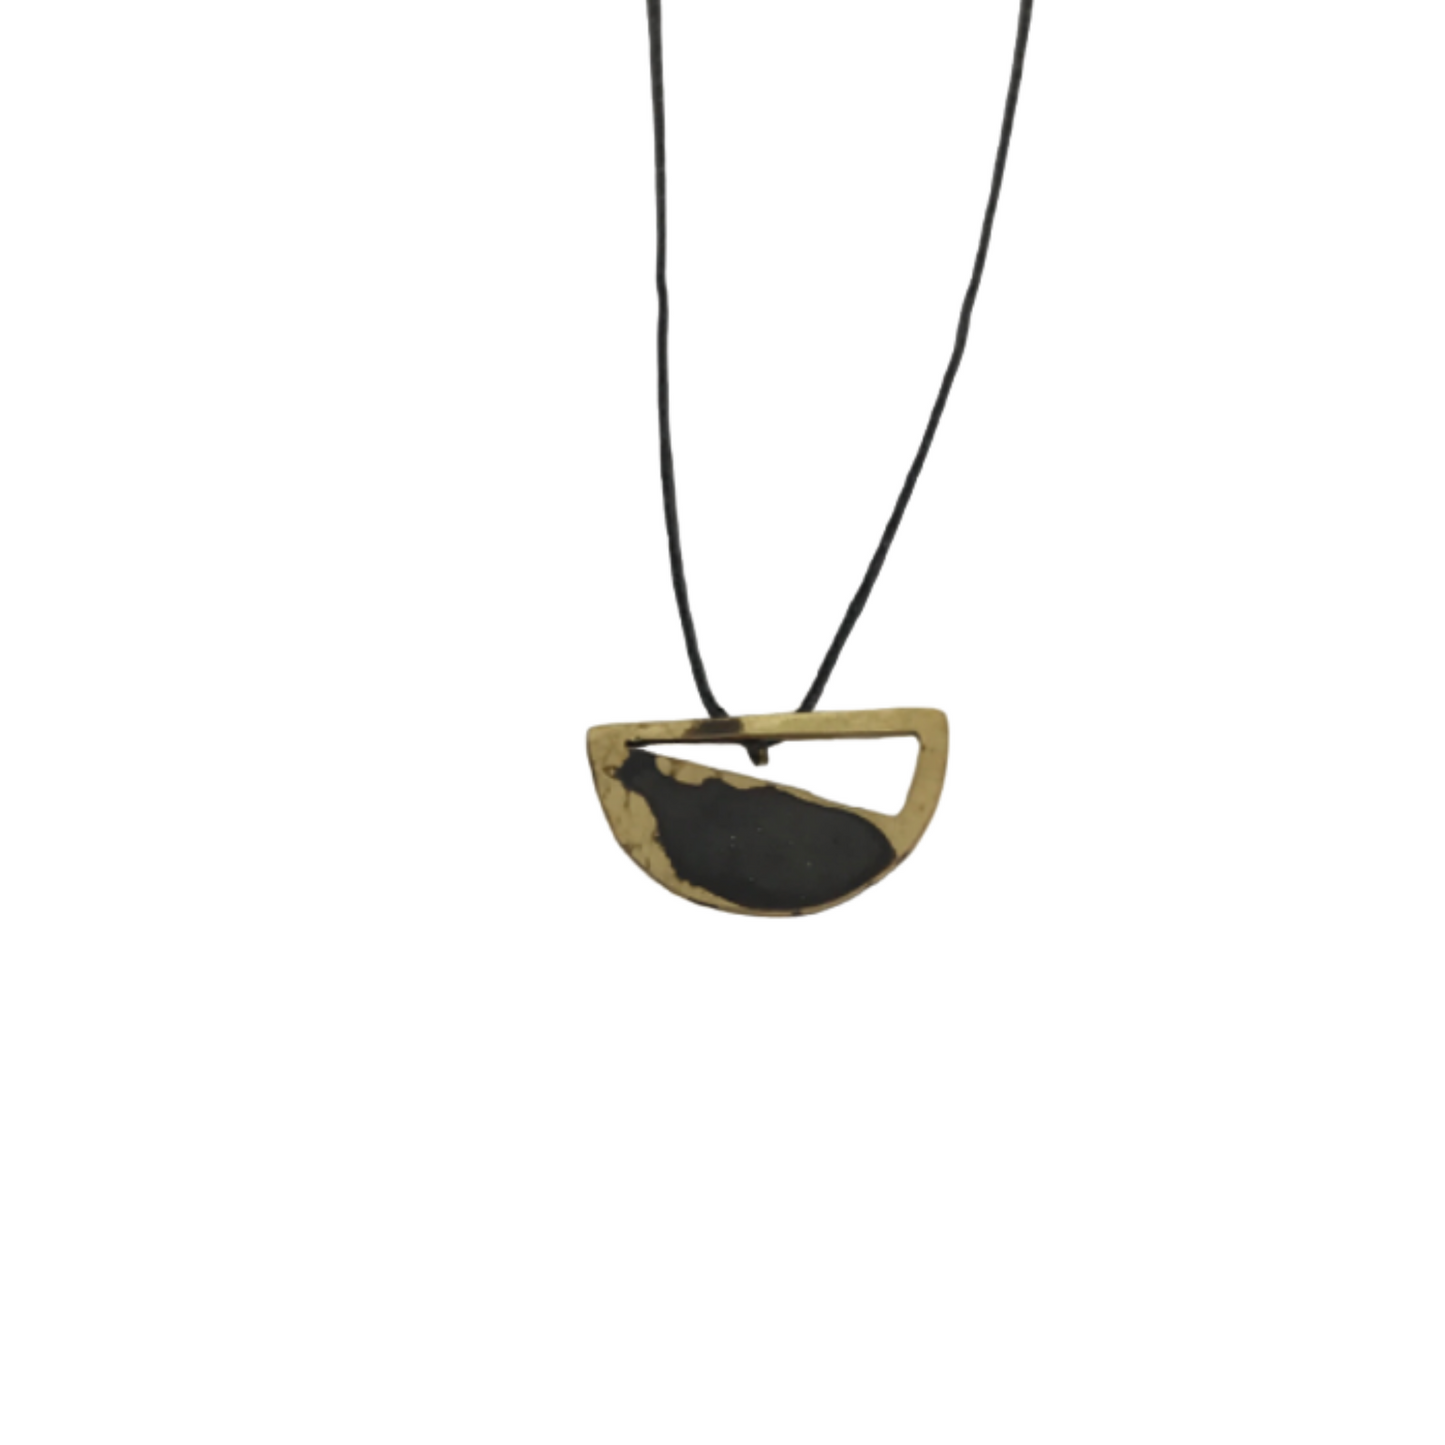 Oxidised brass necklace | Yellow - Black Moonset Necklace